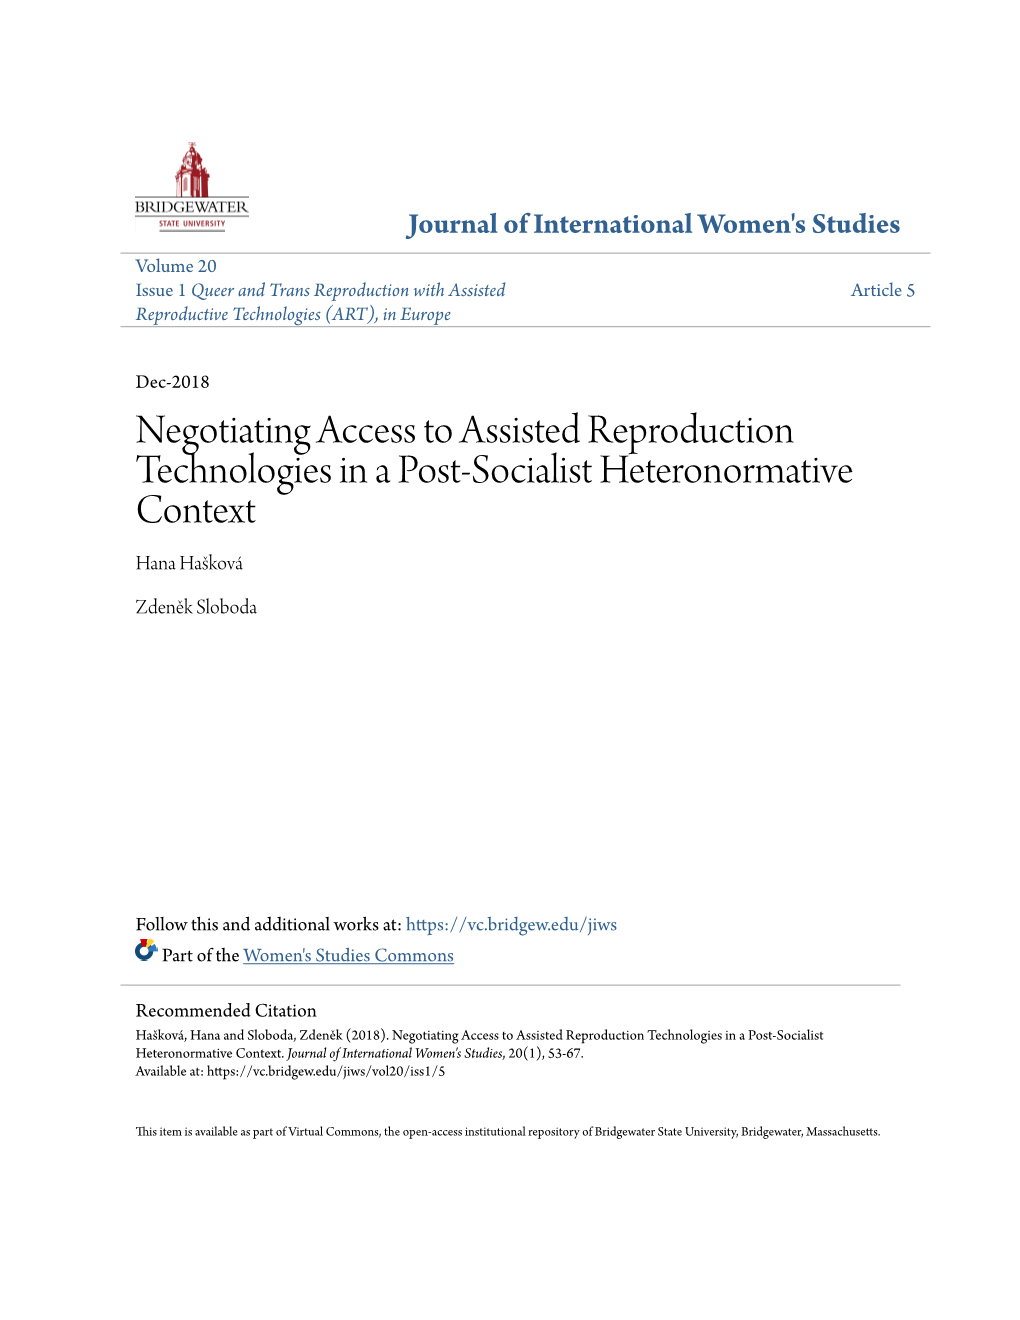 Negotiating Access to Assisted Reproduction Technologies in a Post-Socialist Heteronormative Context Hana Hašková